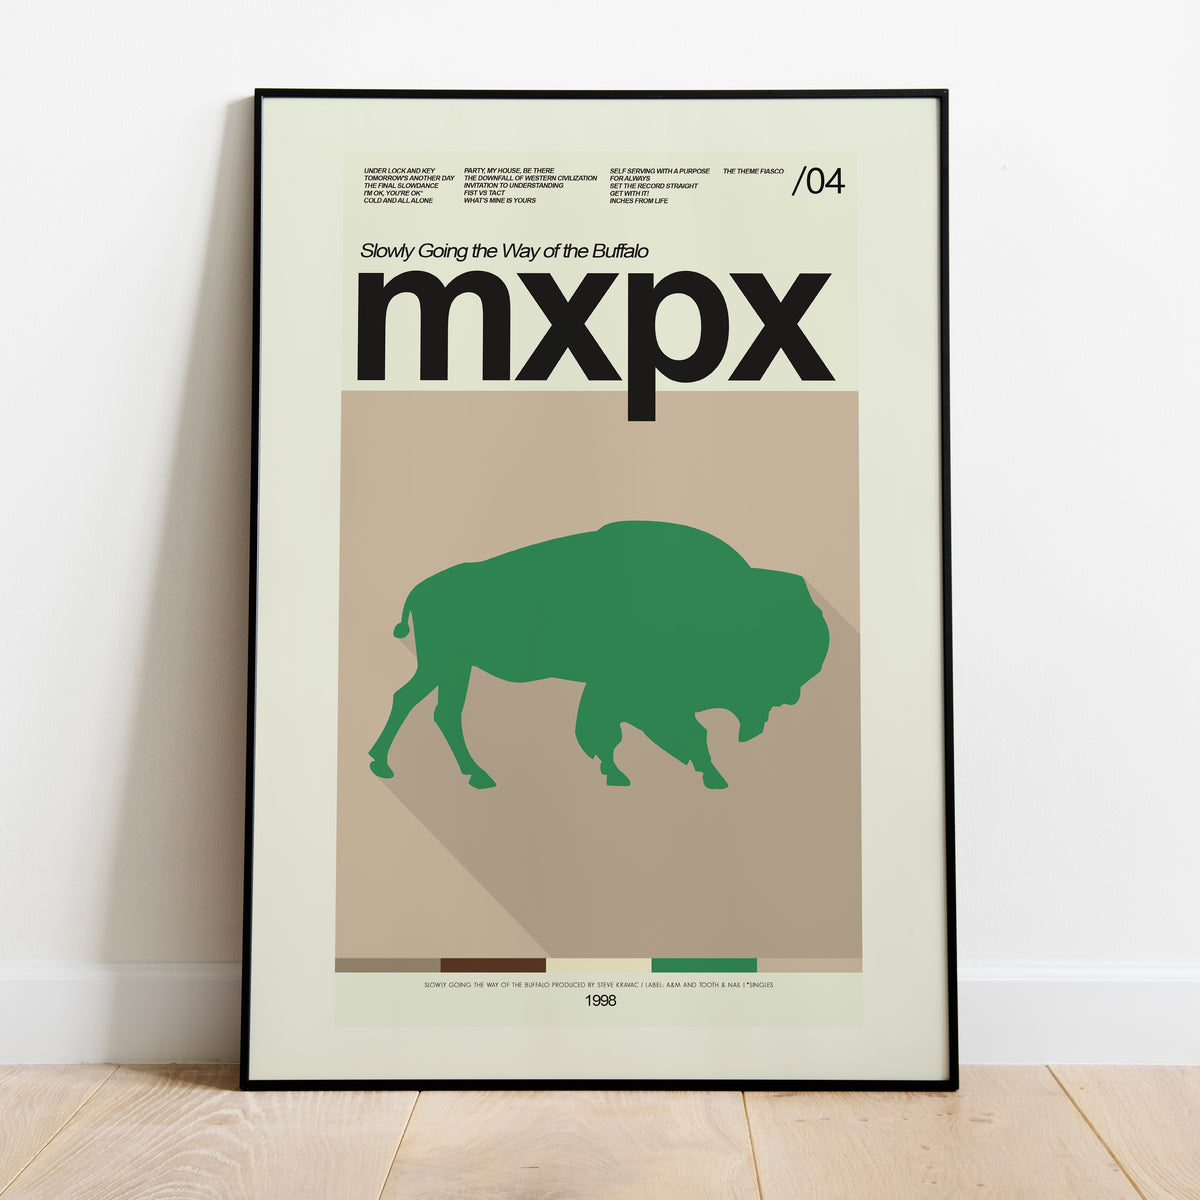 MxPx - Slowly Going the Way of the Buffalo (Album) Inspired | 12"x18" or 18"x24" Print only